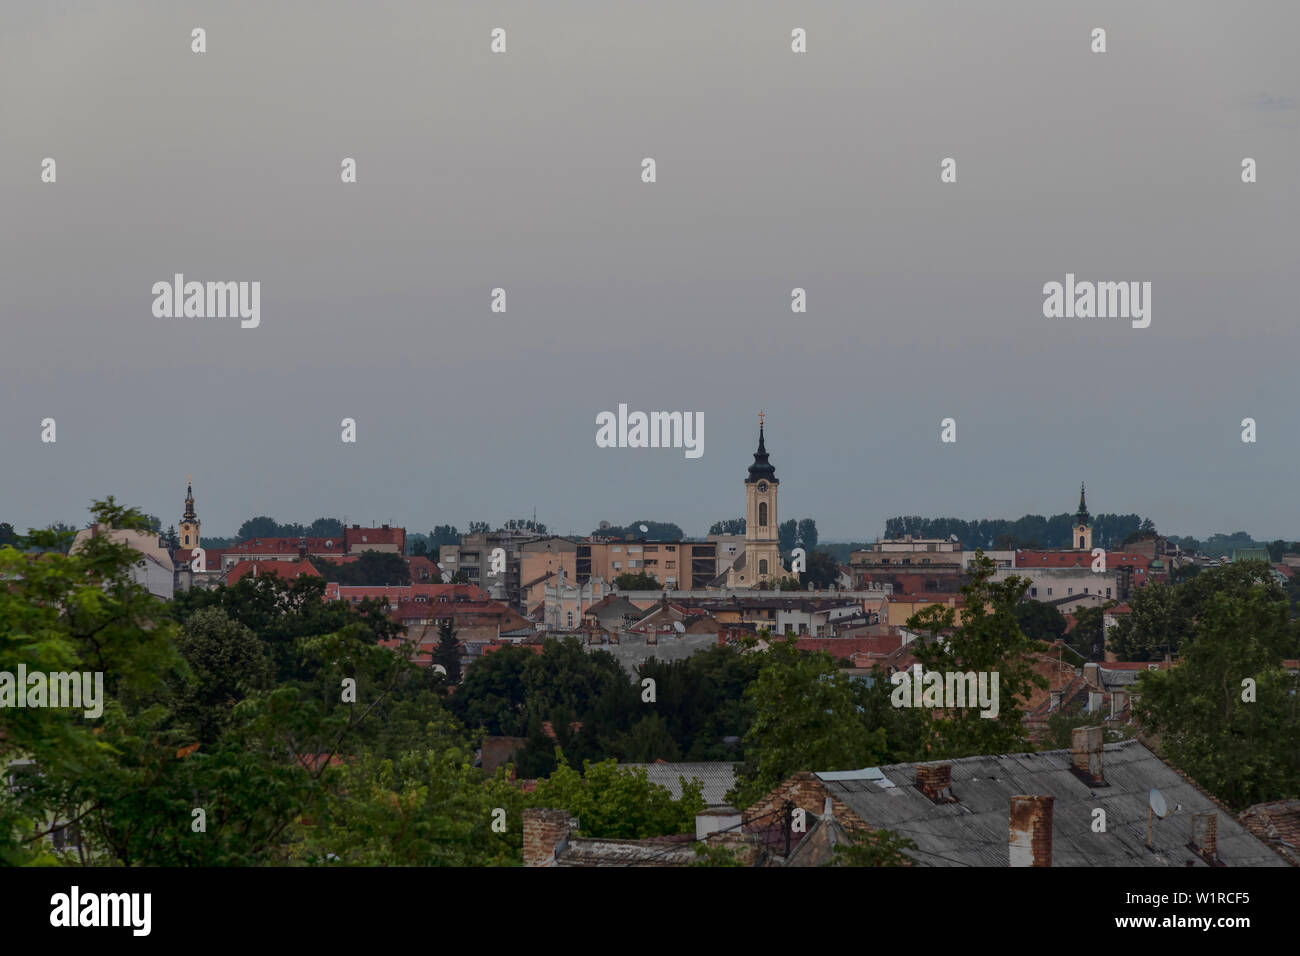 Serbia - View of Zemun, a historic town located on the banks of the Danube within the city of Belgrade Stock Photo